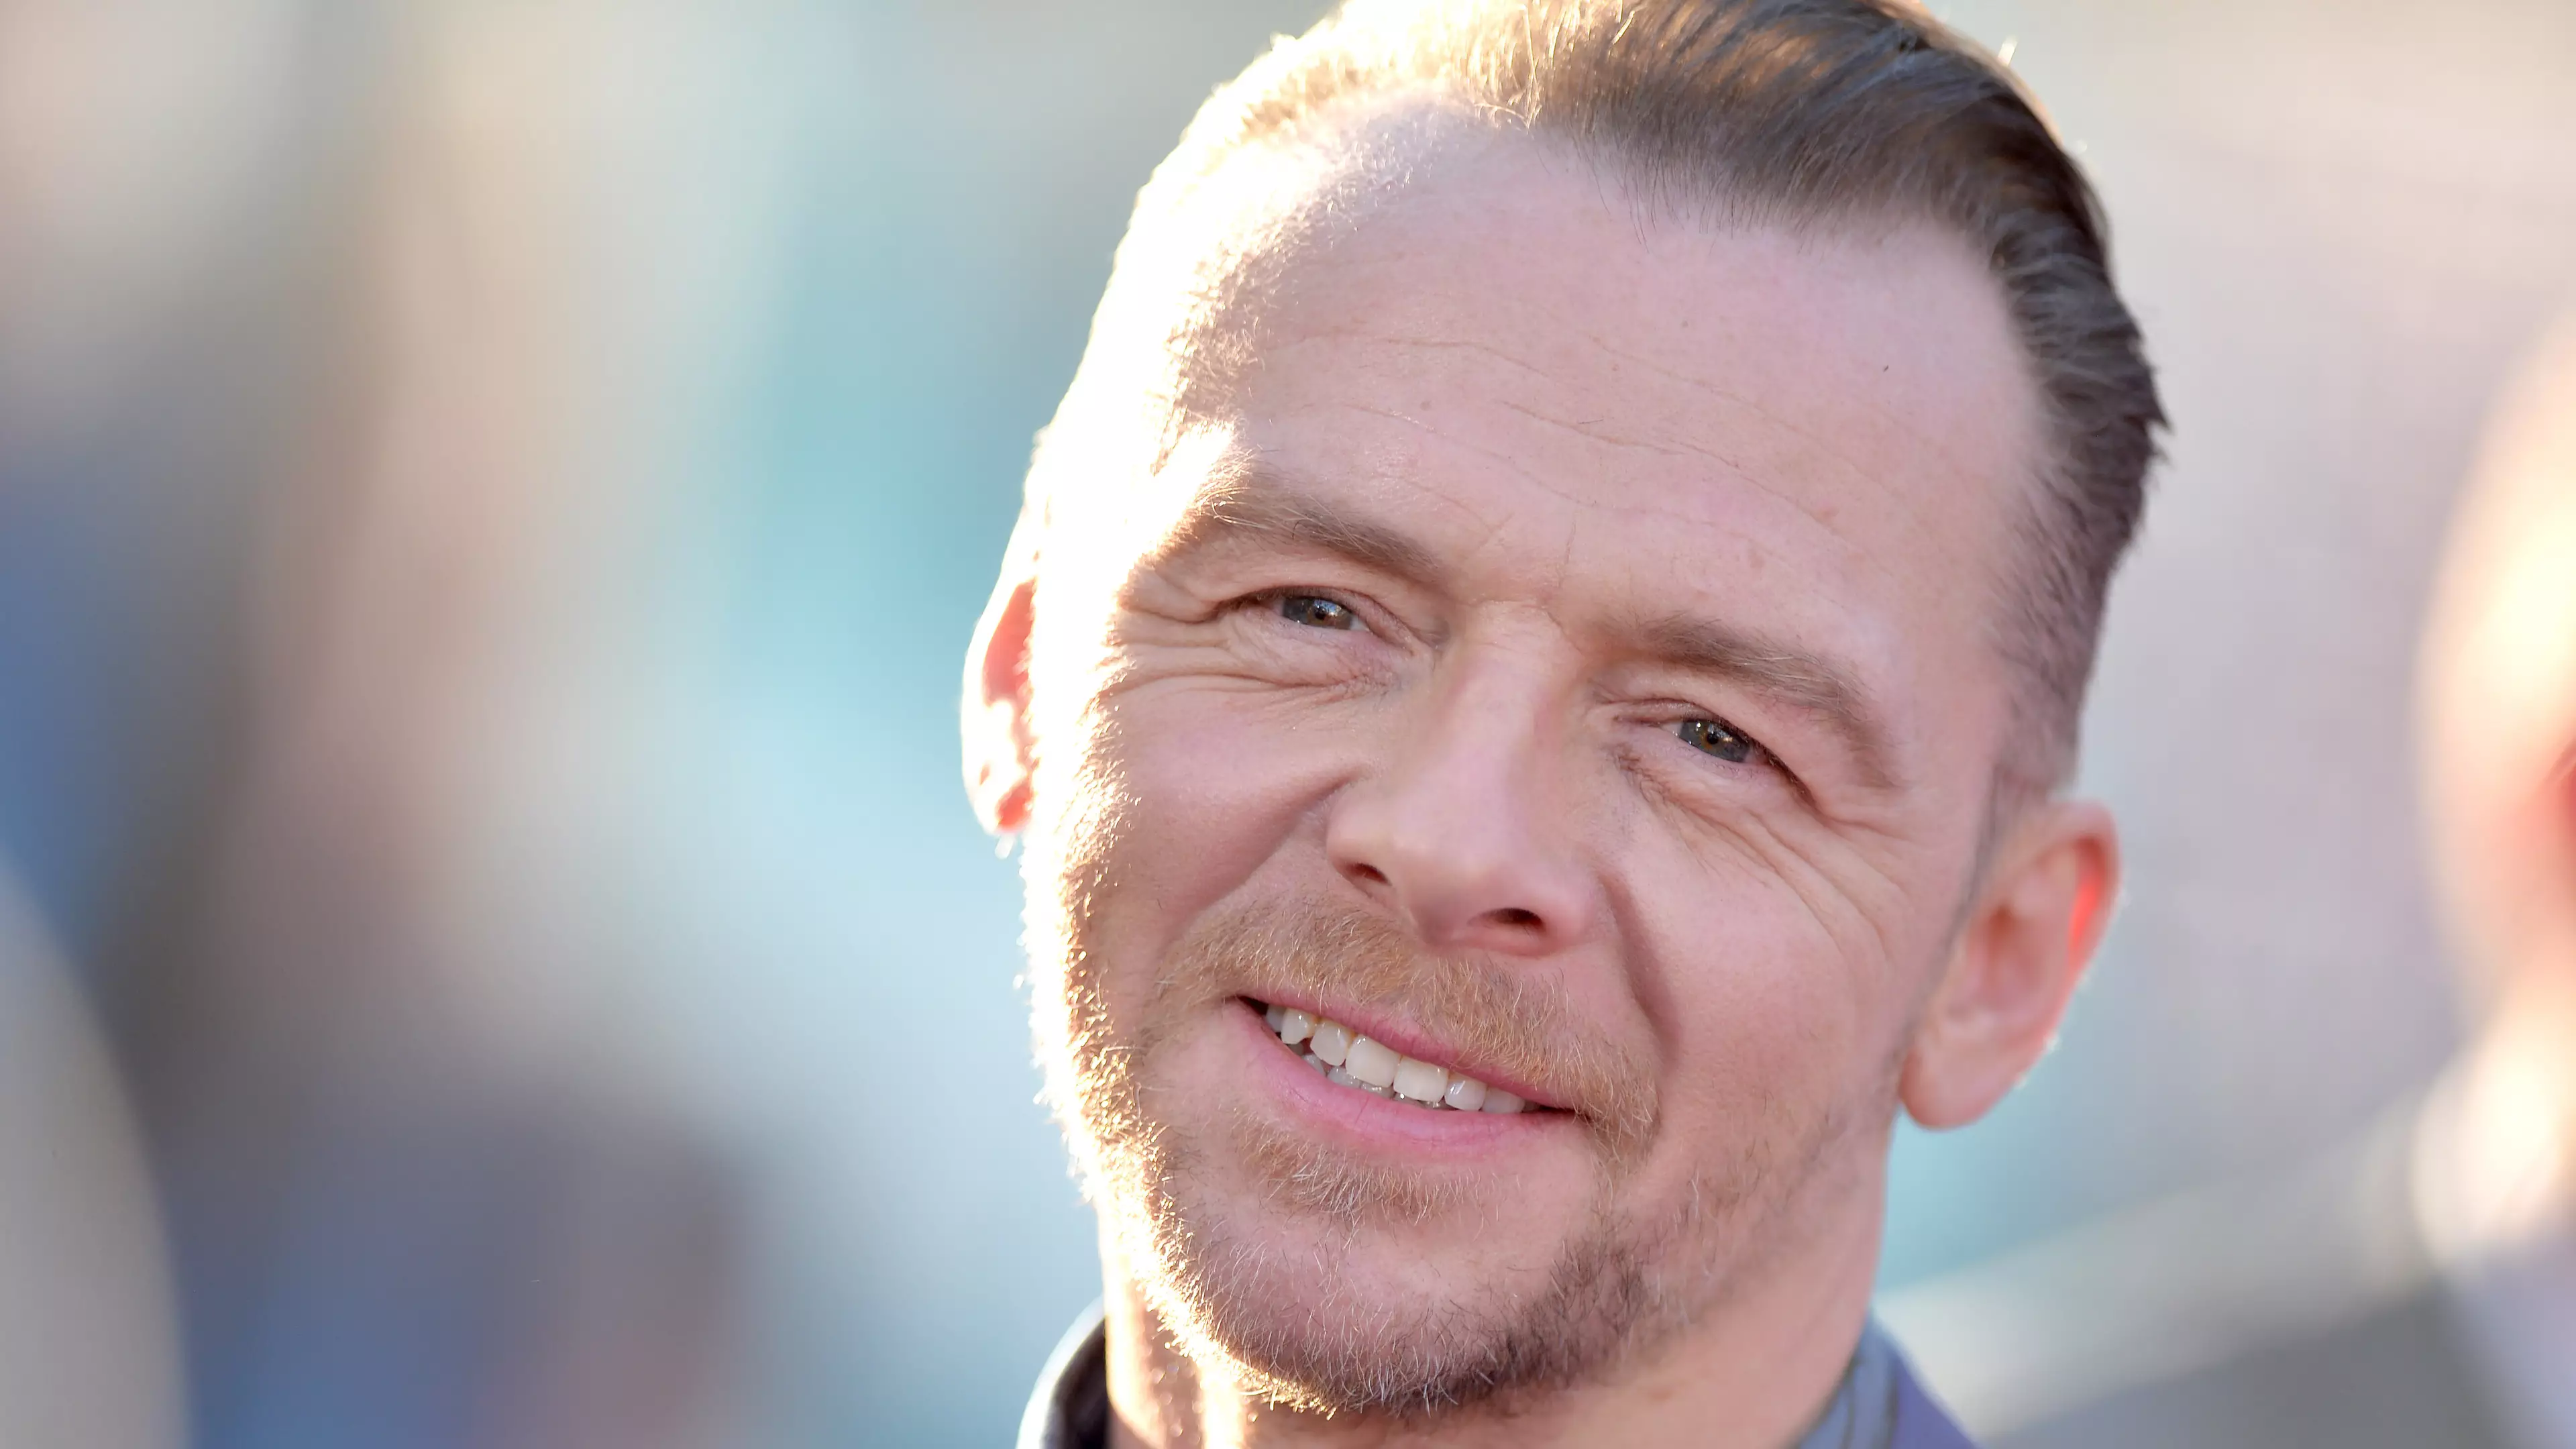 Simon Pegg Opens Up About His Battle With Alcohol And Depression